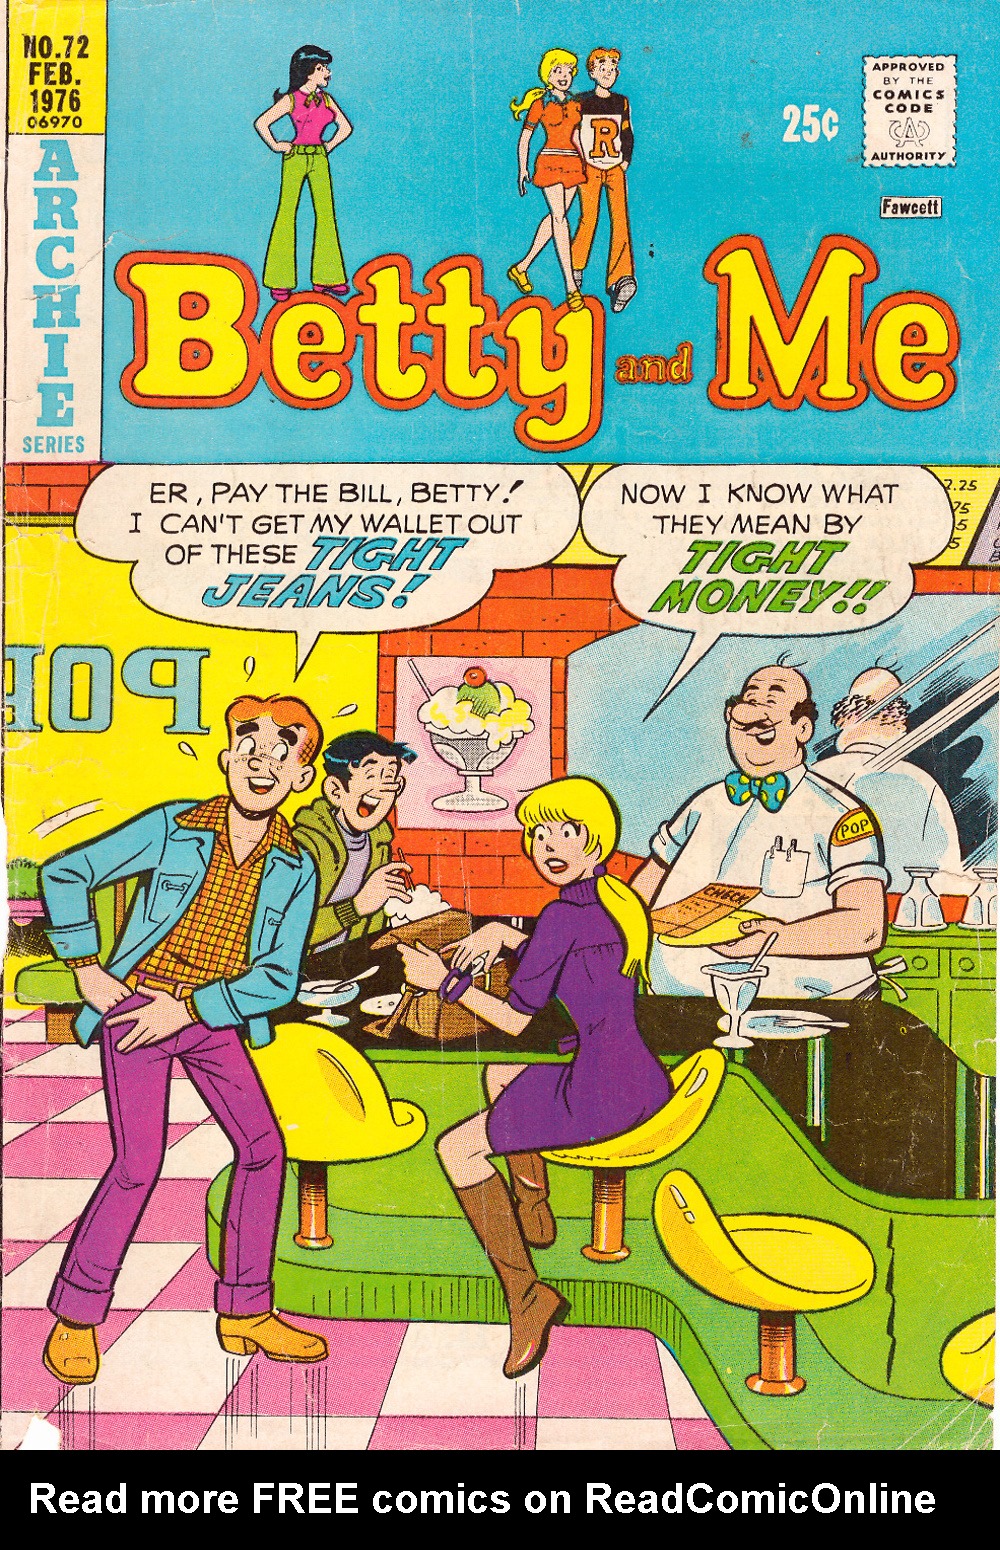 Read online Betty and Me comic -  Issue #72 - 1